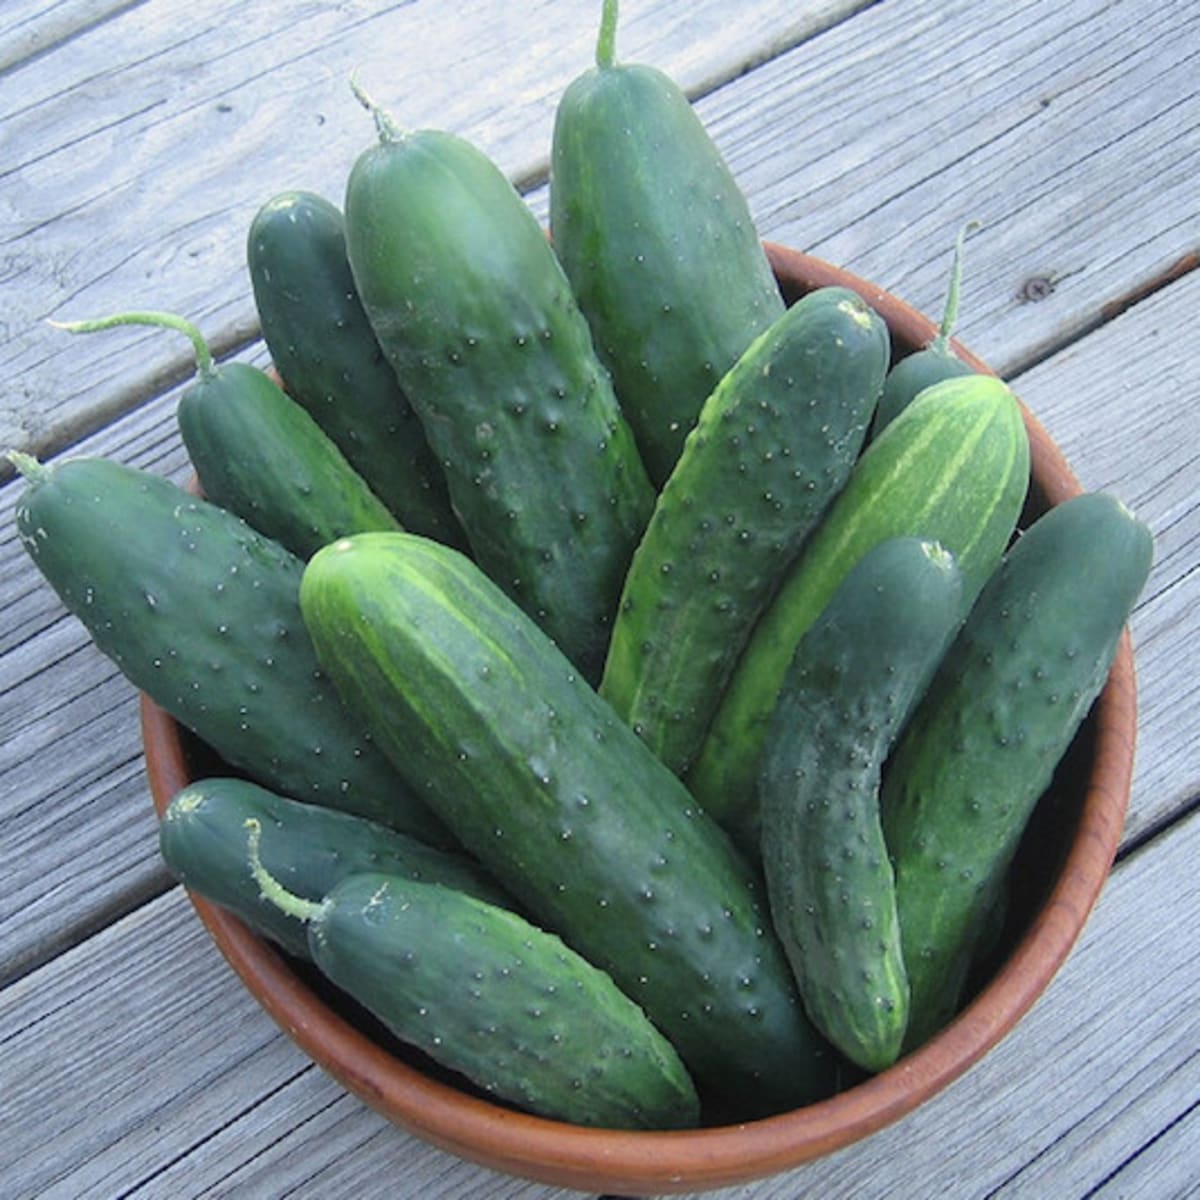 Cool Cukes How To Grow Cucumbers For Summer Recipes Organic Authority,What Is Tanf Mean